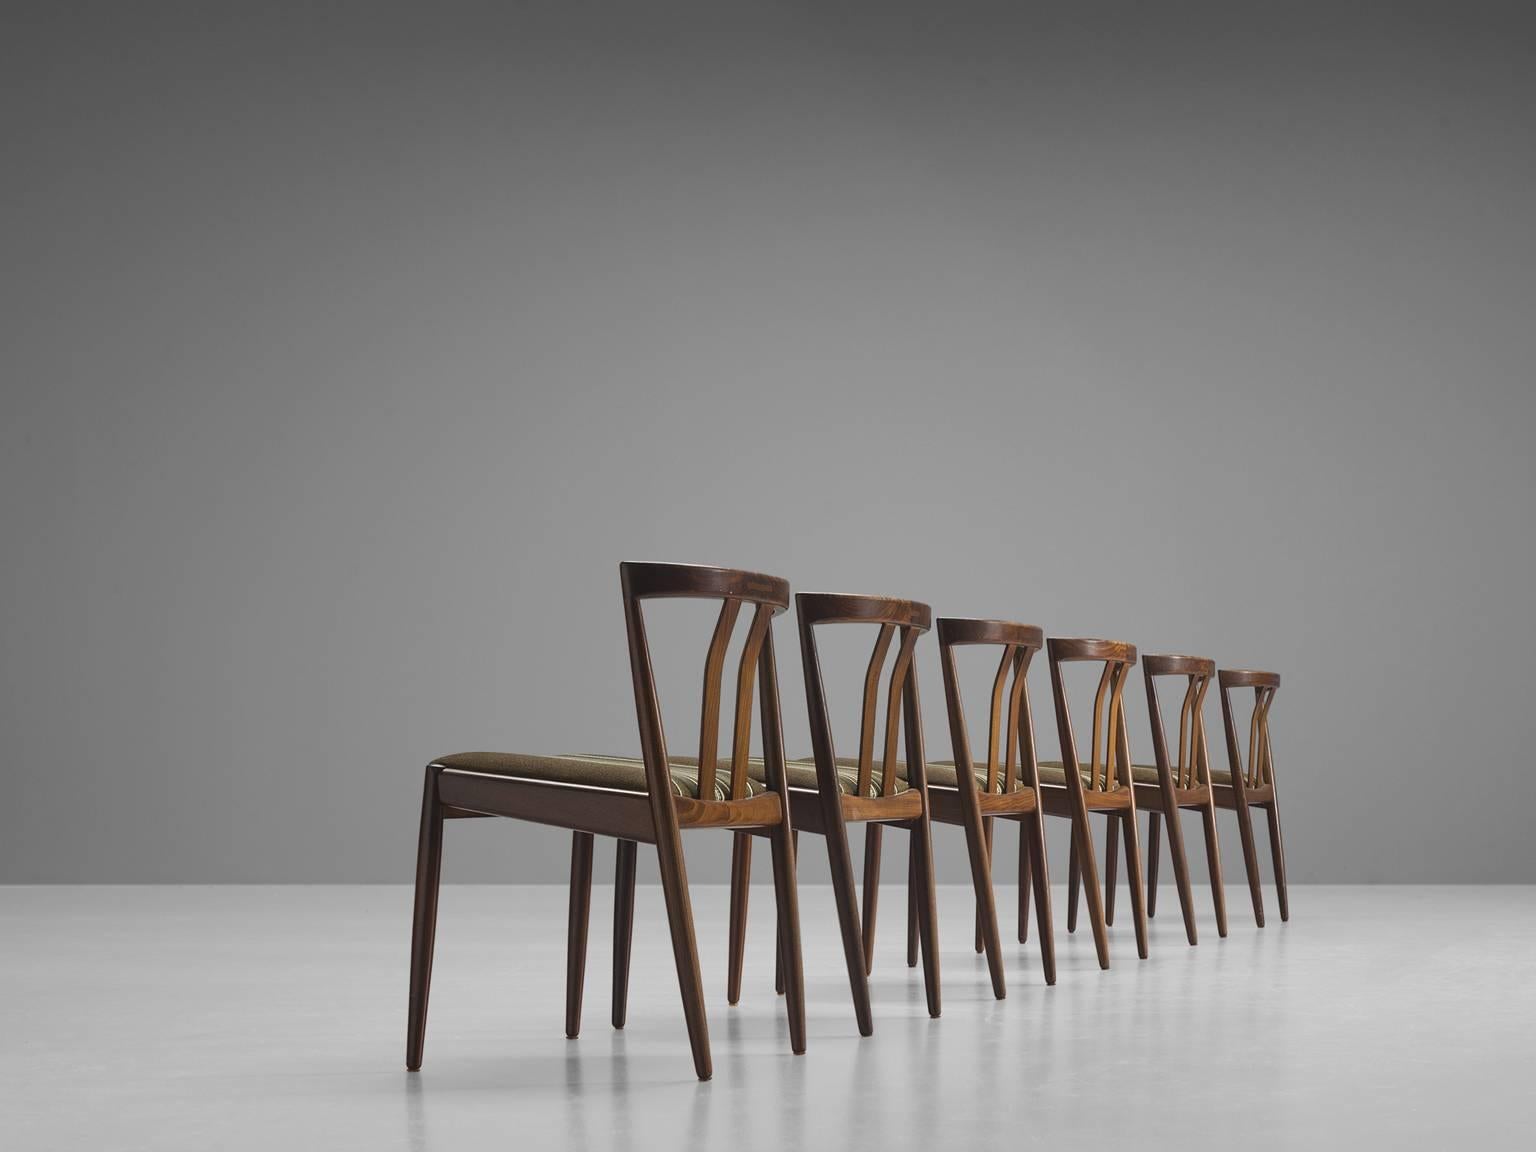 Six chairs, teak and wool, Denmark, 1960s

Elegant set of six Danish dining chairs with open back with two slats, diagonal back legs that run all the way through to the back rest. This set is playful and dynamic yet also bears traits of classic